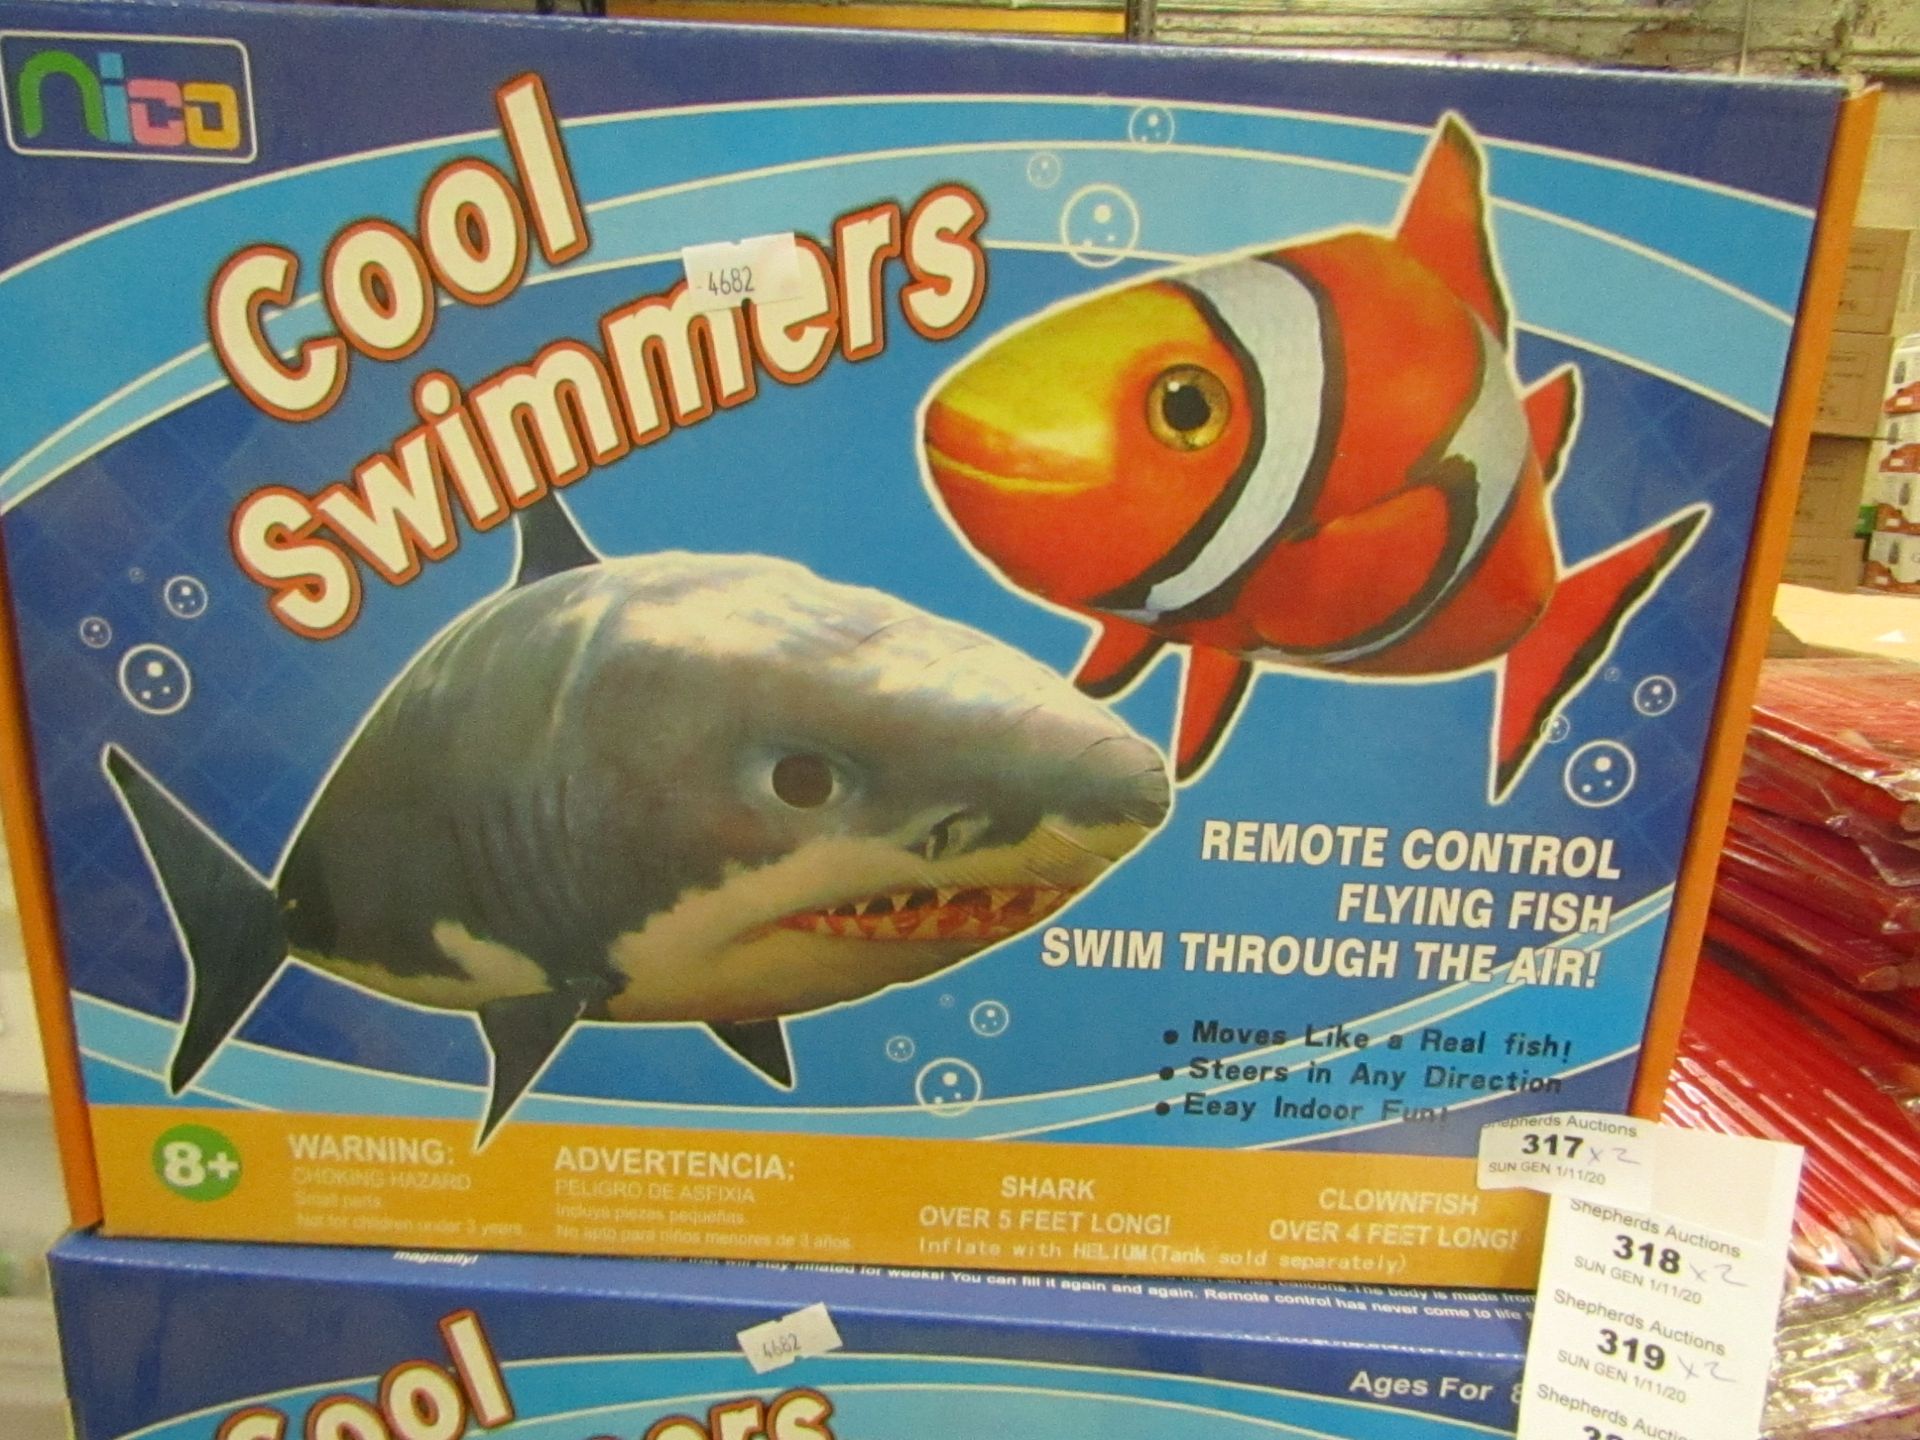 2 x Nico Cool Swimmers Remote Controlled Flying Fish. New & Boxed